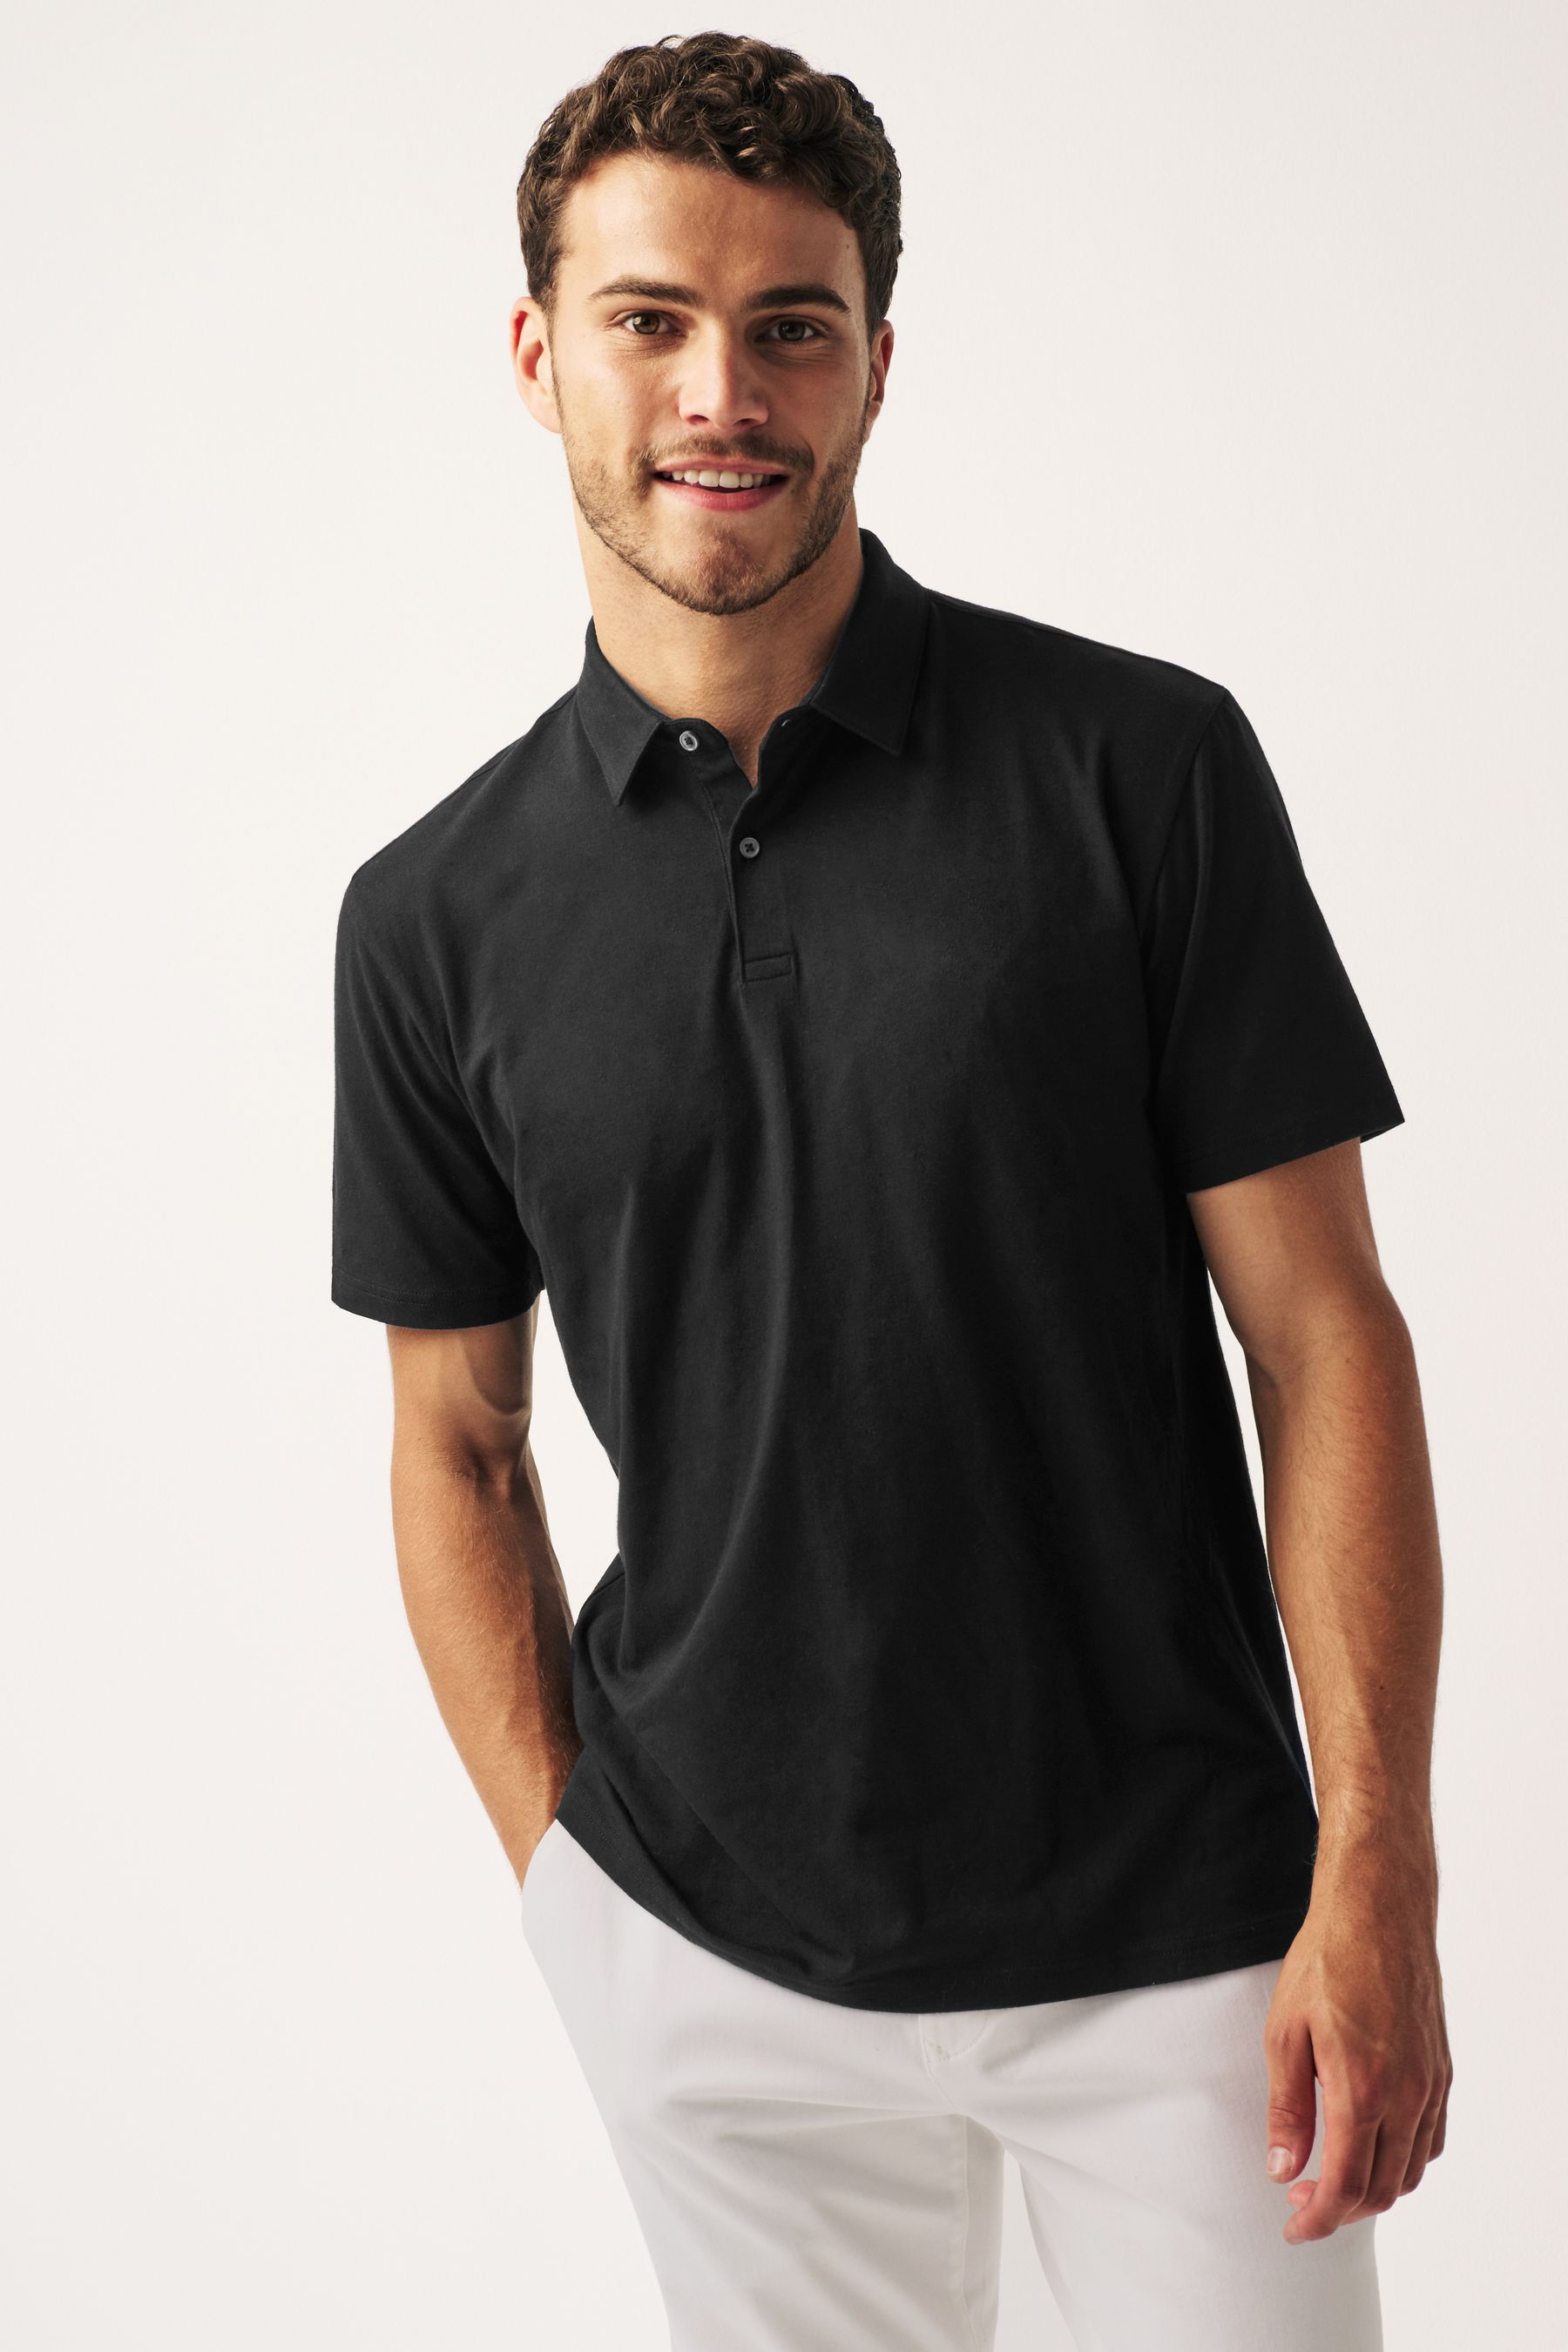 Buy Black Short Sleeve Polo Shirt from the Next UK online shop